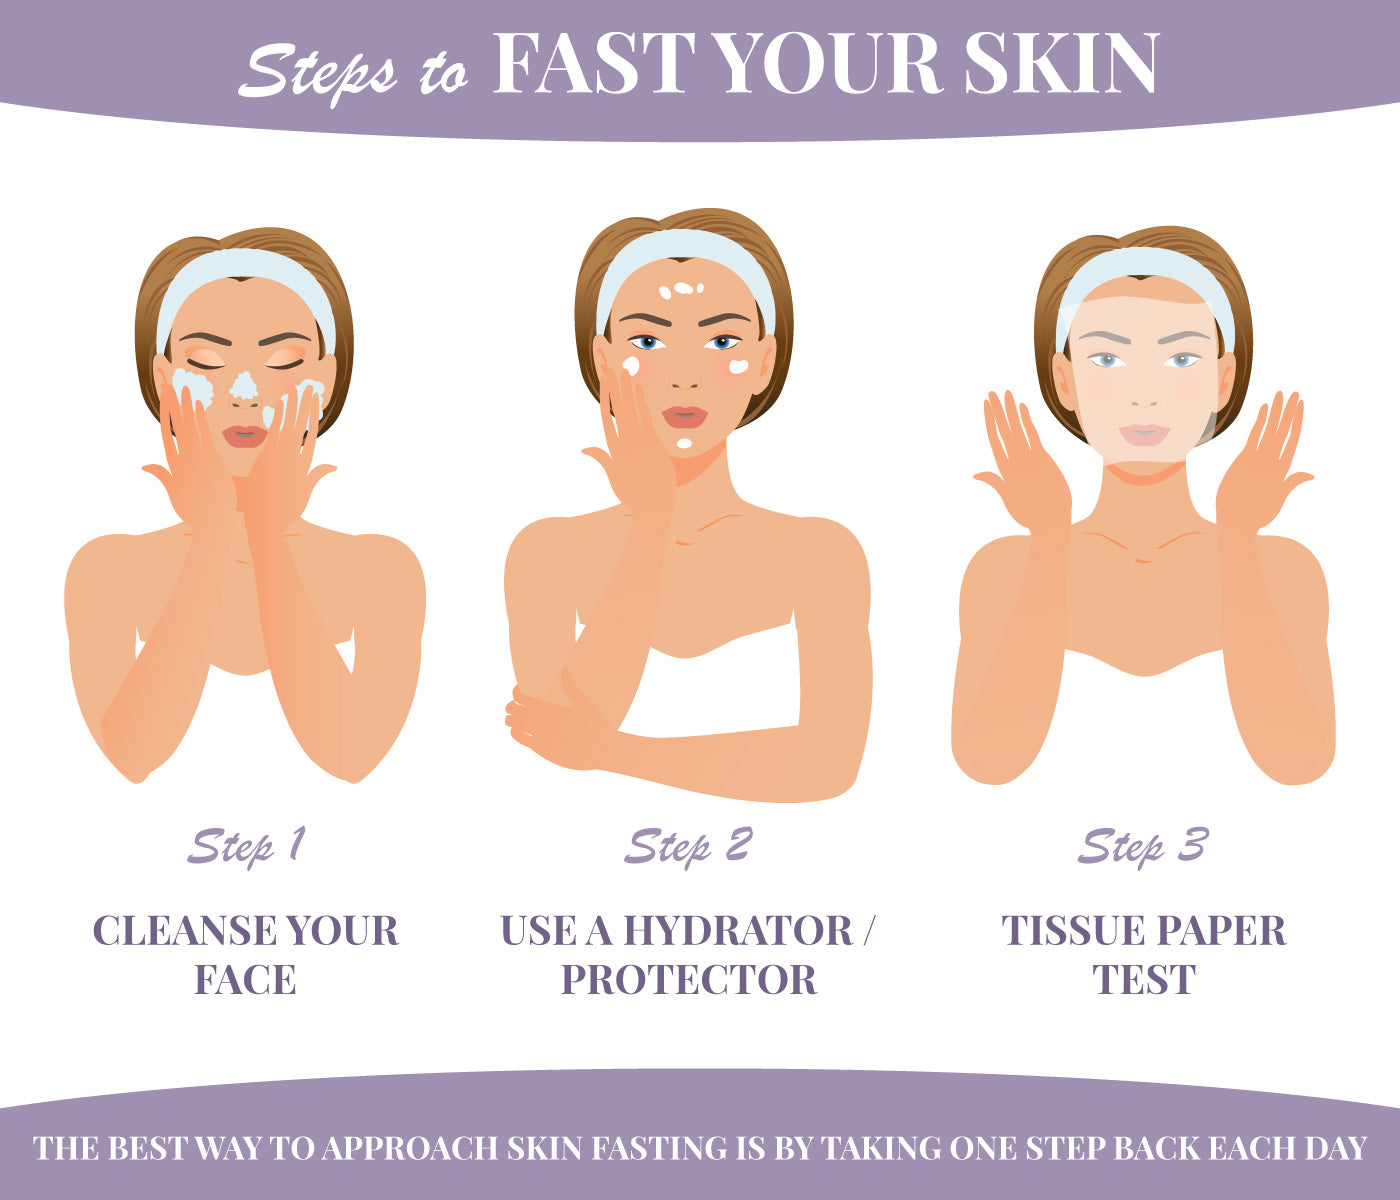 This is a image Steps on how to do Skin fasting on www.sublimelife.in